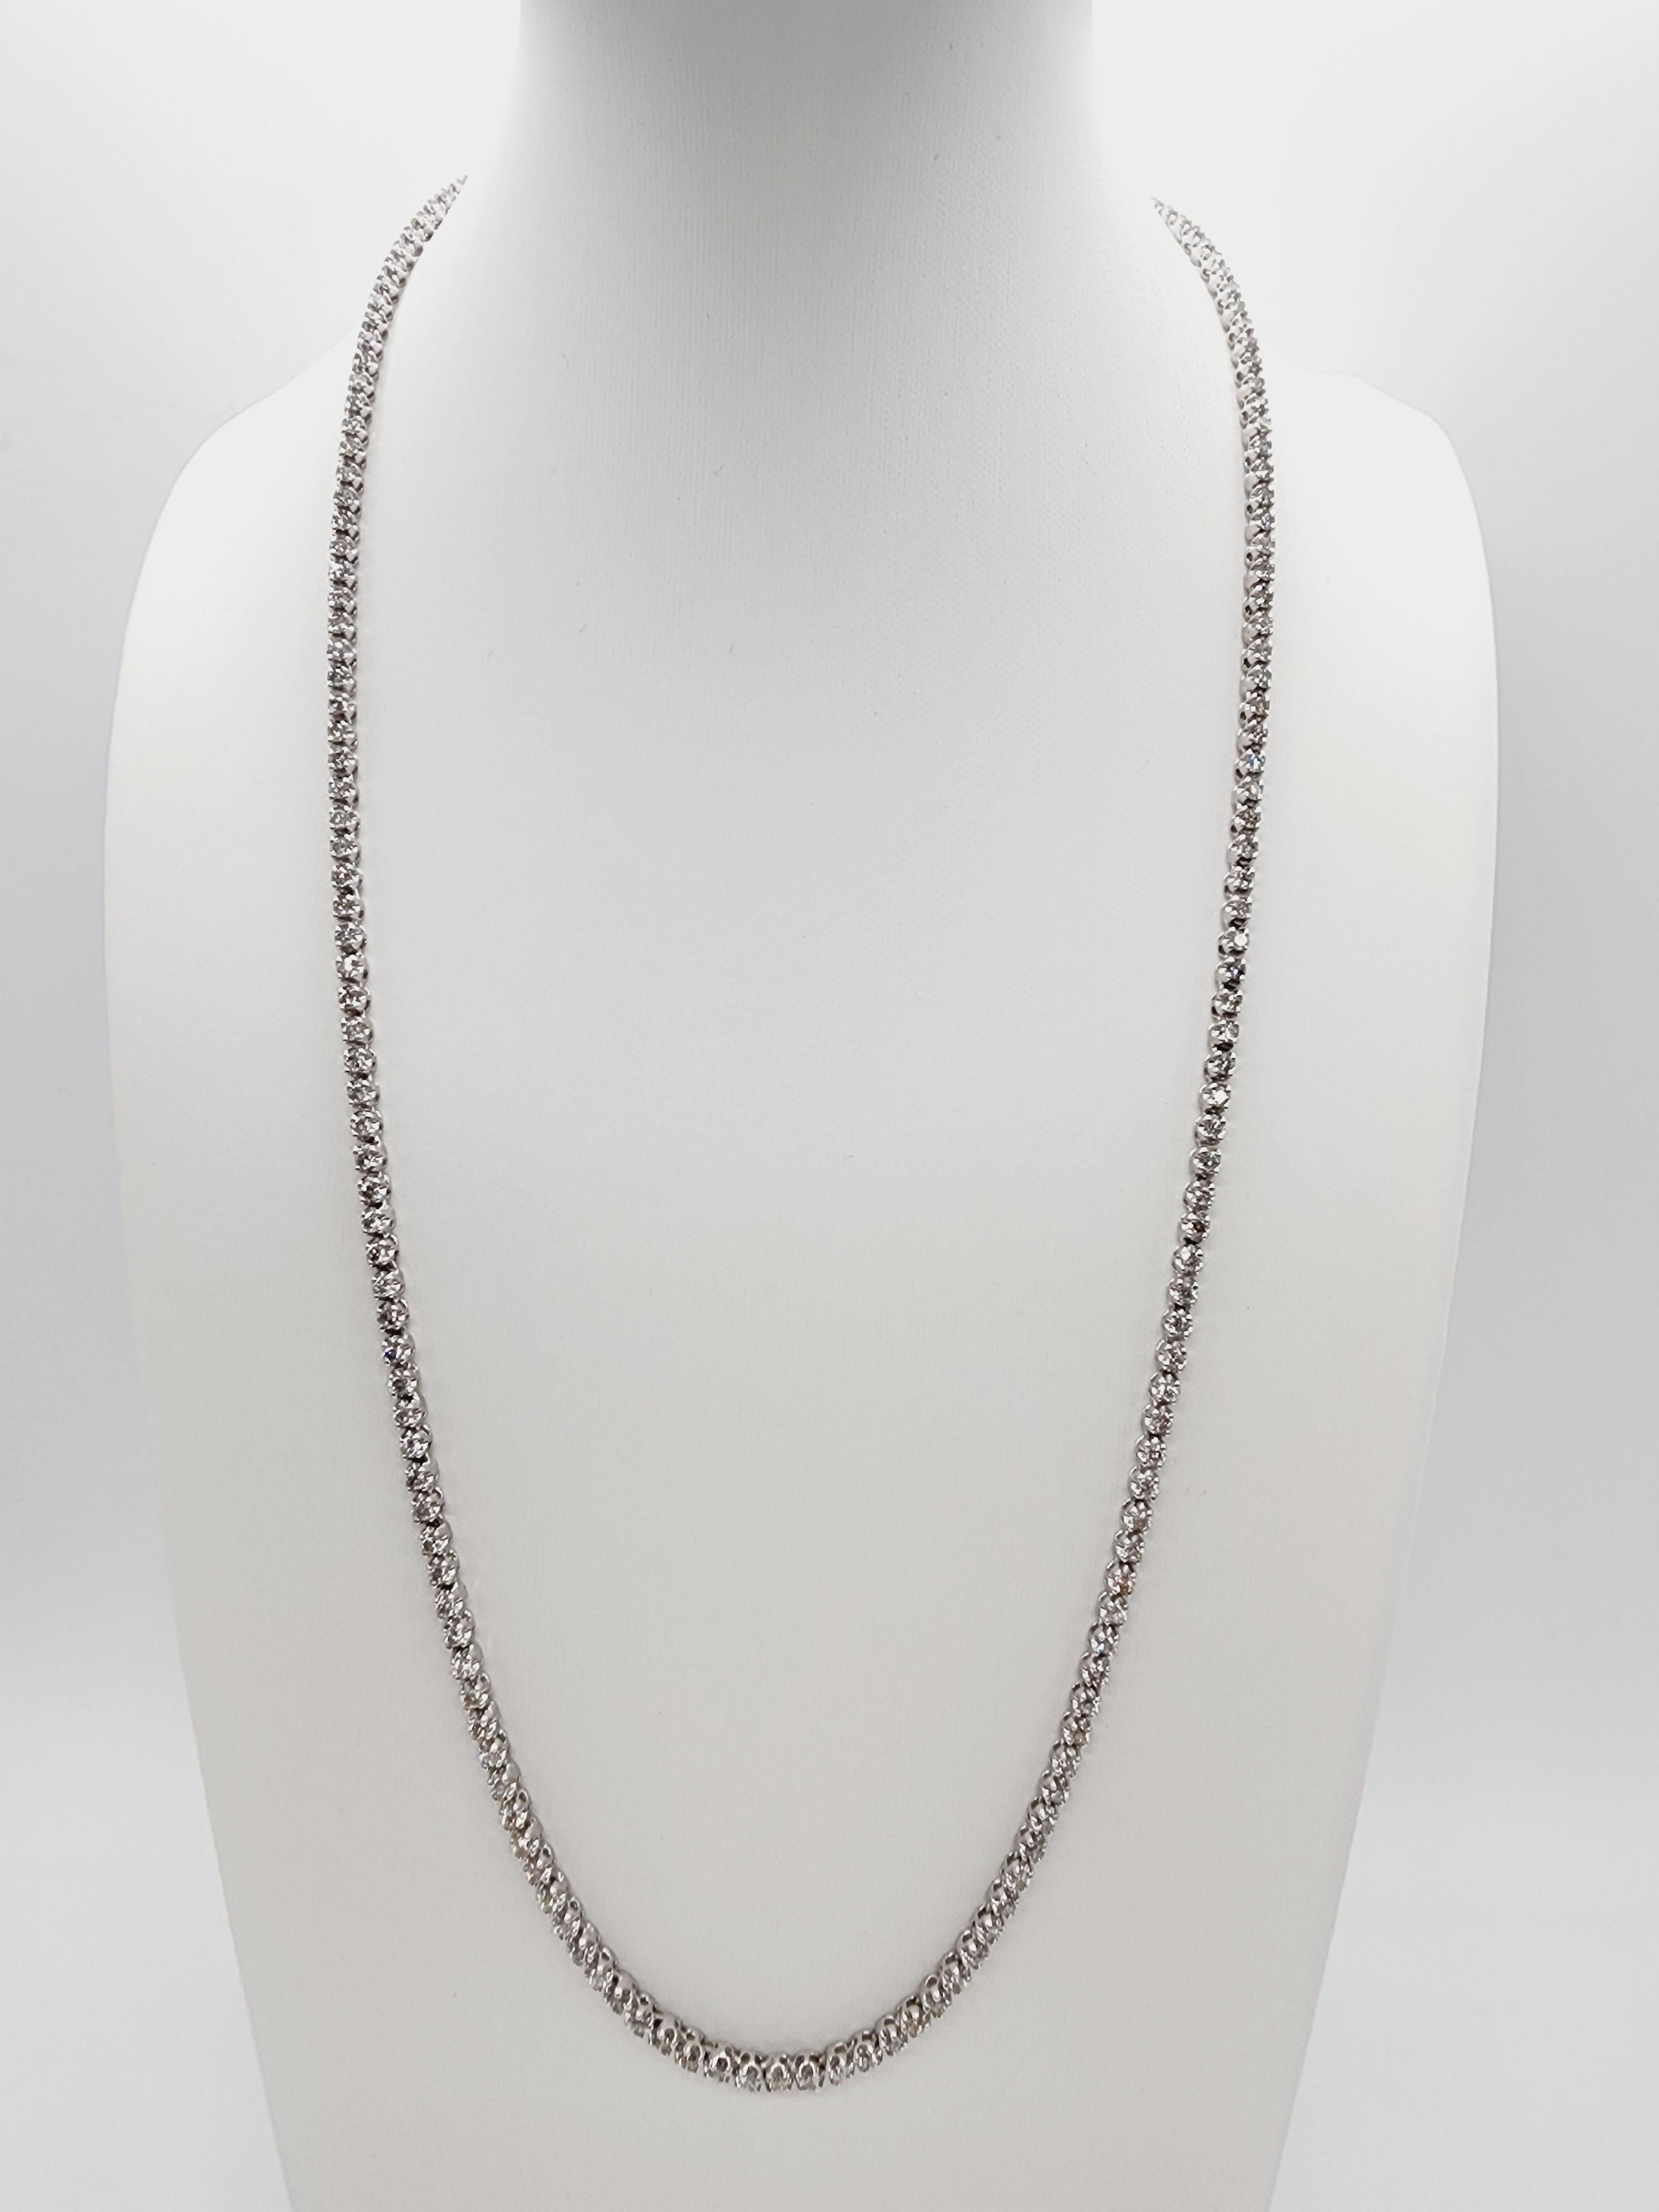 Brilliant and beautiful buttercup necklace, natural round-brilliant cut white diamonds clean and excellent shine. 14k white gold buttercup setting. 
18 inch length. Average G Color, SI Clarity.  2.9 mm wide.